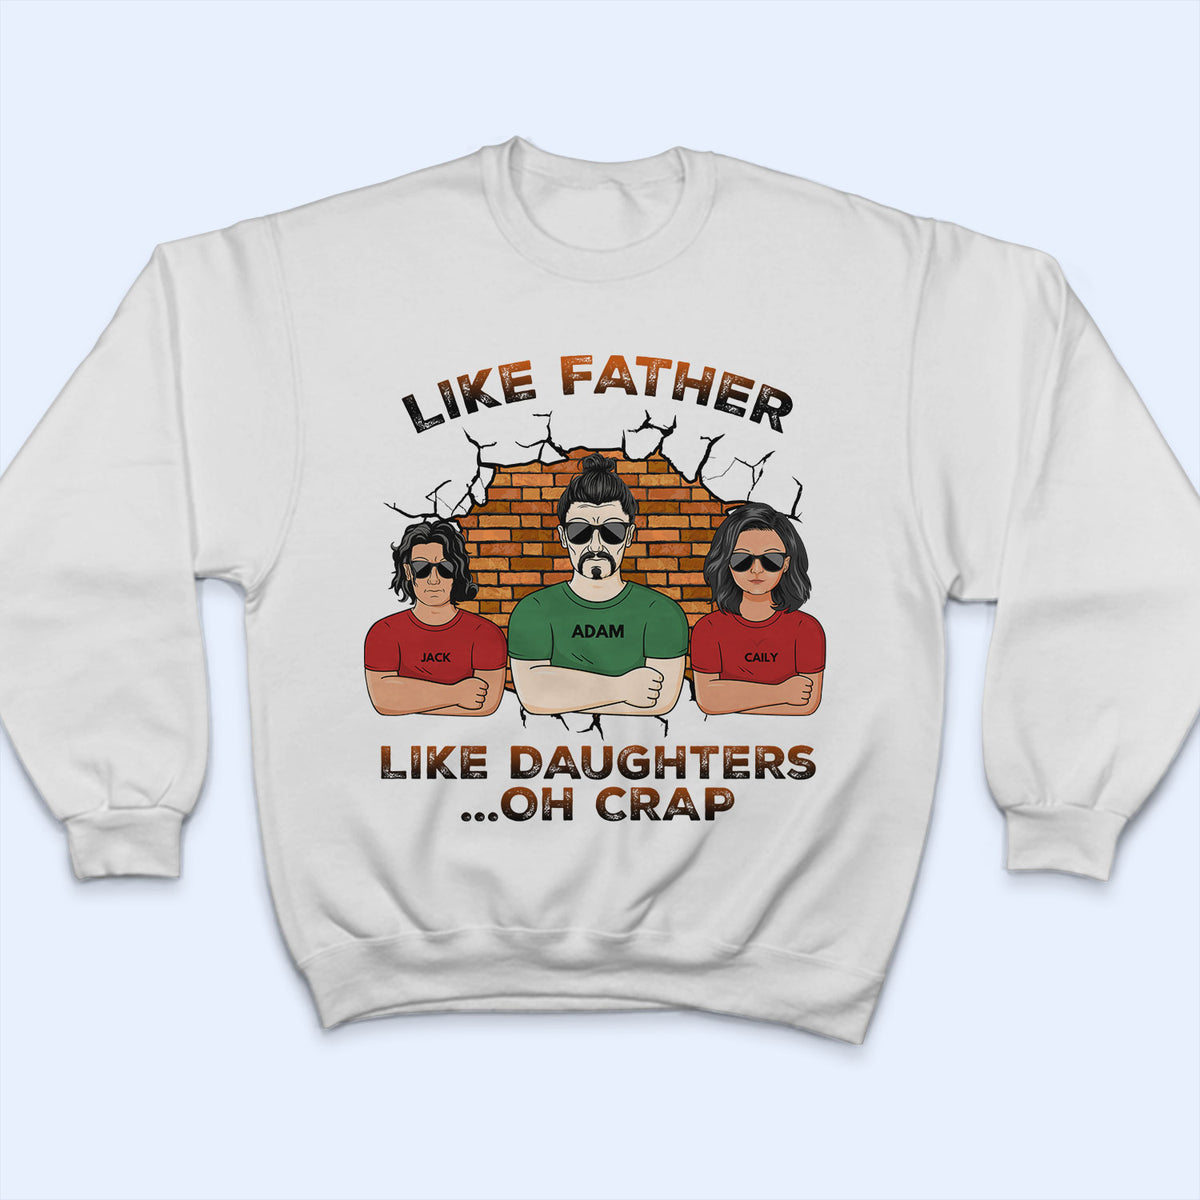 Like Father Like Daughter Oh Crap - Birthday, Funny Gift for Dad, Daddy, Grandpa, Husband, Daughters - Personalized Custom T Shirt T-Shirt / Tshirt WH